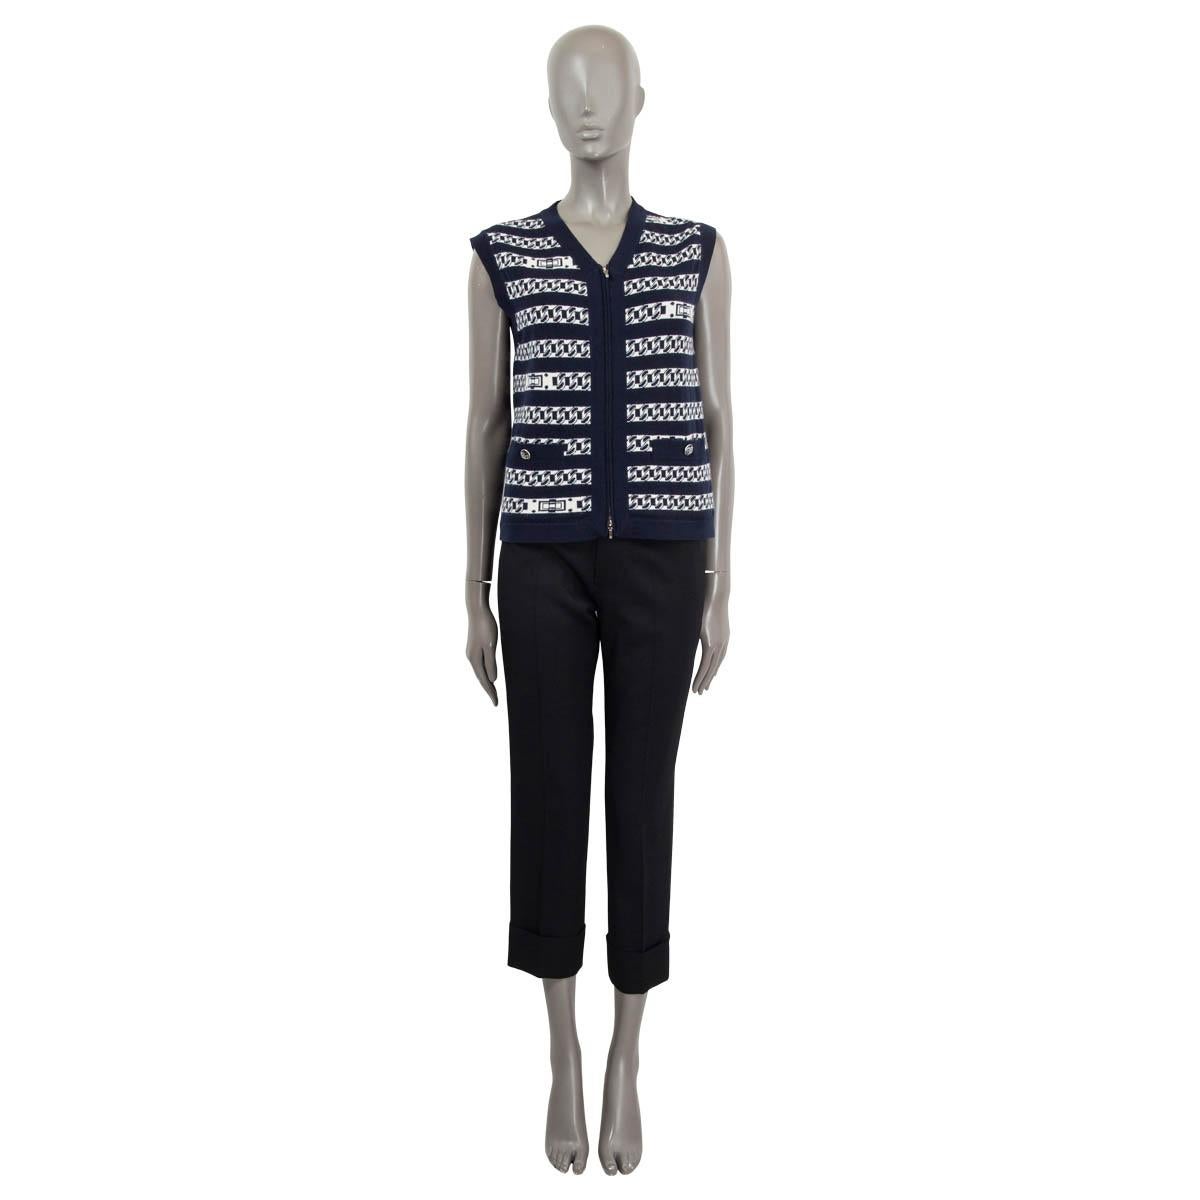 100% authentic Chanel sleeveless knit vest in navy and white cashmere (100%). Features two sewn shut 'CC' buttoned patch pockets on the front. Opens with two 'CC' zippers at the front. Unlined. Has been worn and is in excellent condition. Matching